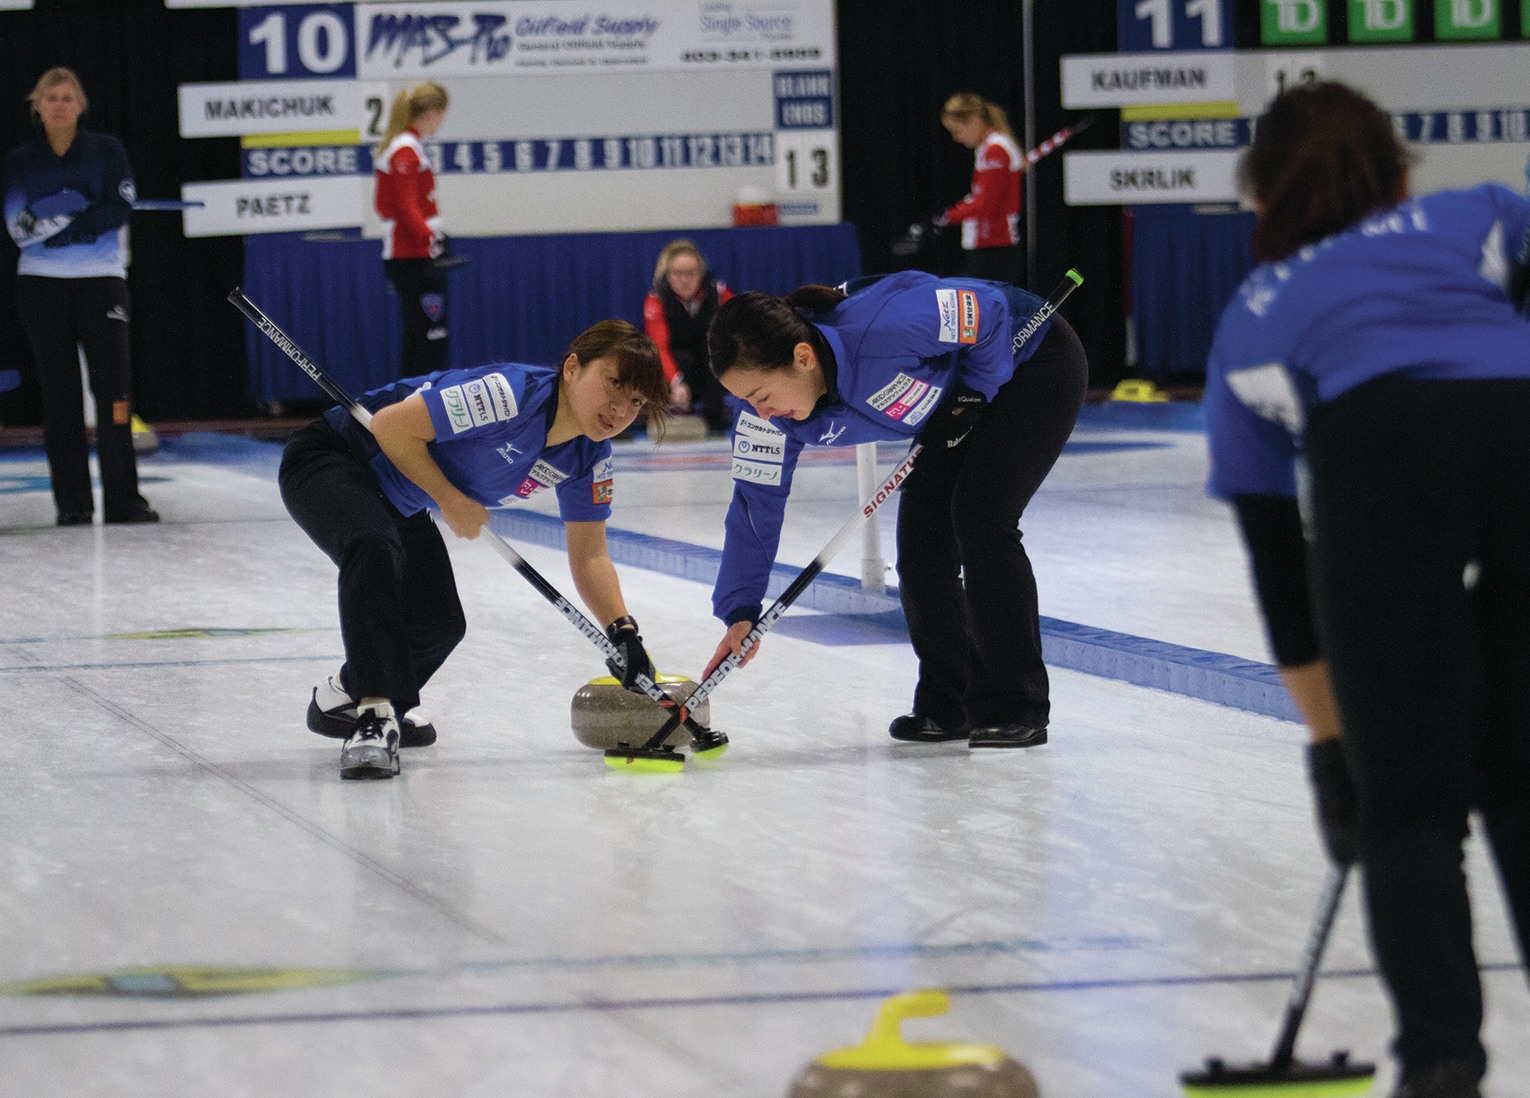 CURLING CLASSIC - More than 250 curlers decended on Red Deer last weekend for the 10th annual Red Deer Curling Classic. The tournament ran from Friday through Monday and featured teams from all over Canada and the world.